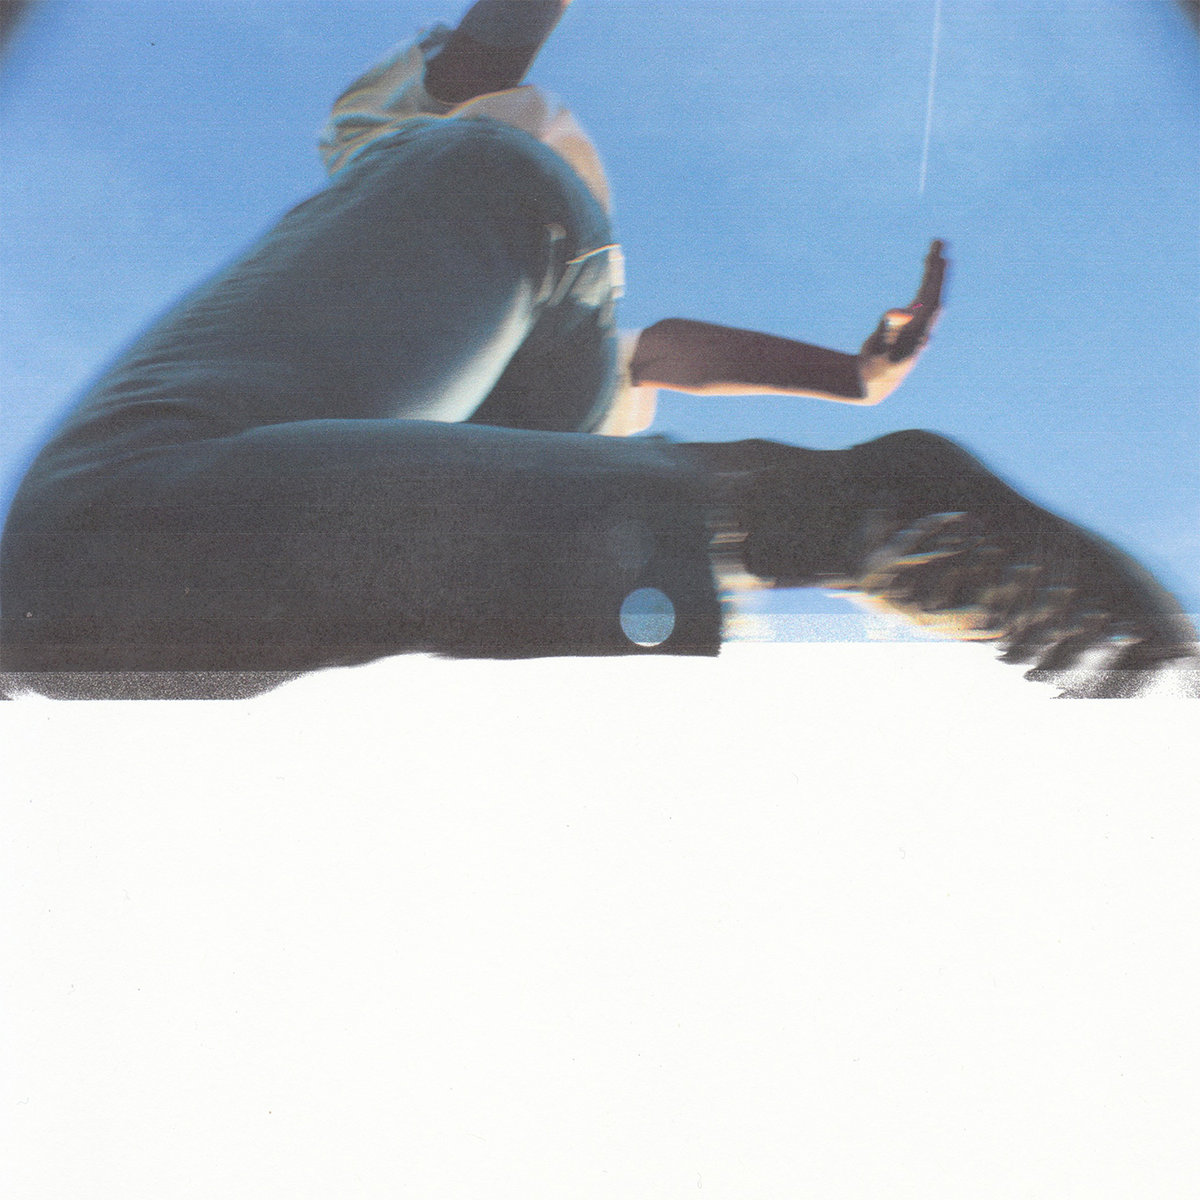 The album cover is a blurry image of someone wearing blue jeans jumping over the camera.